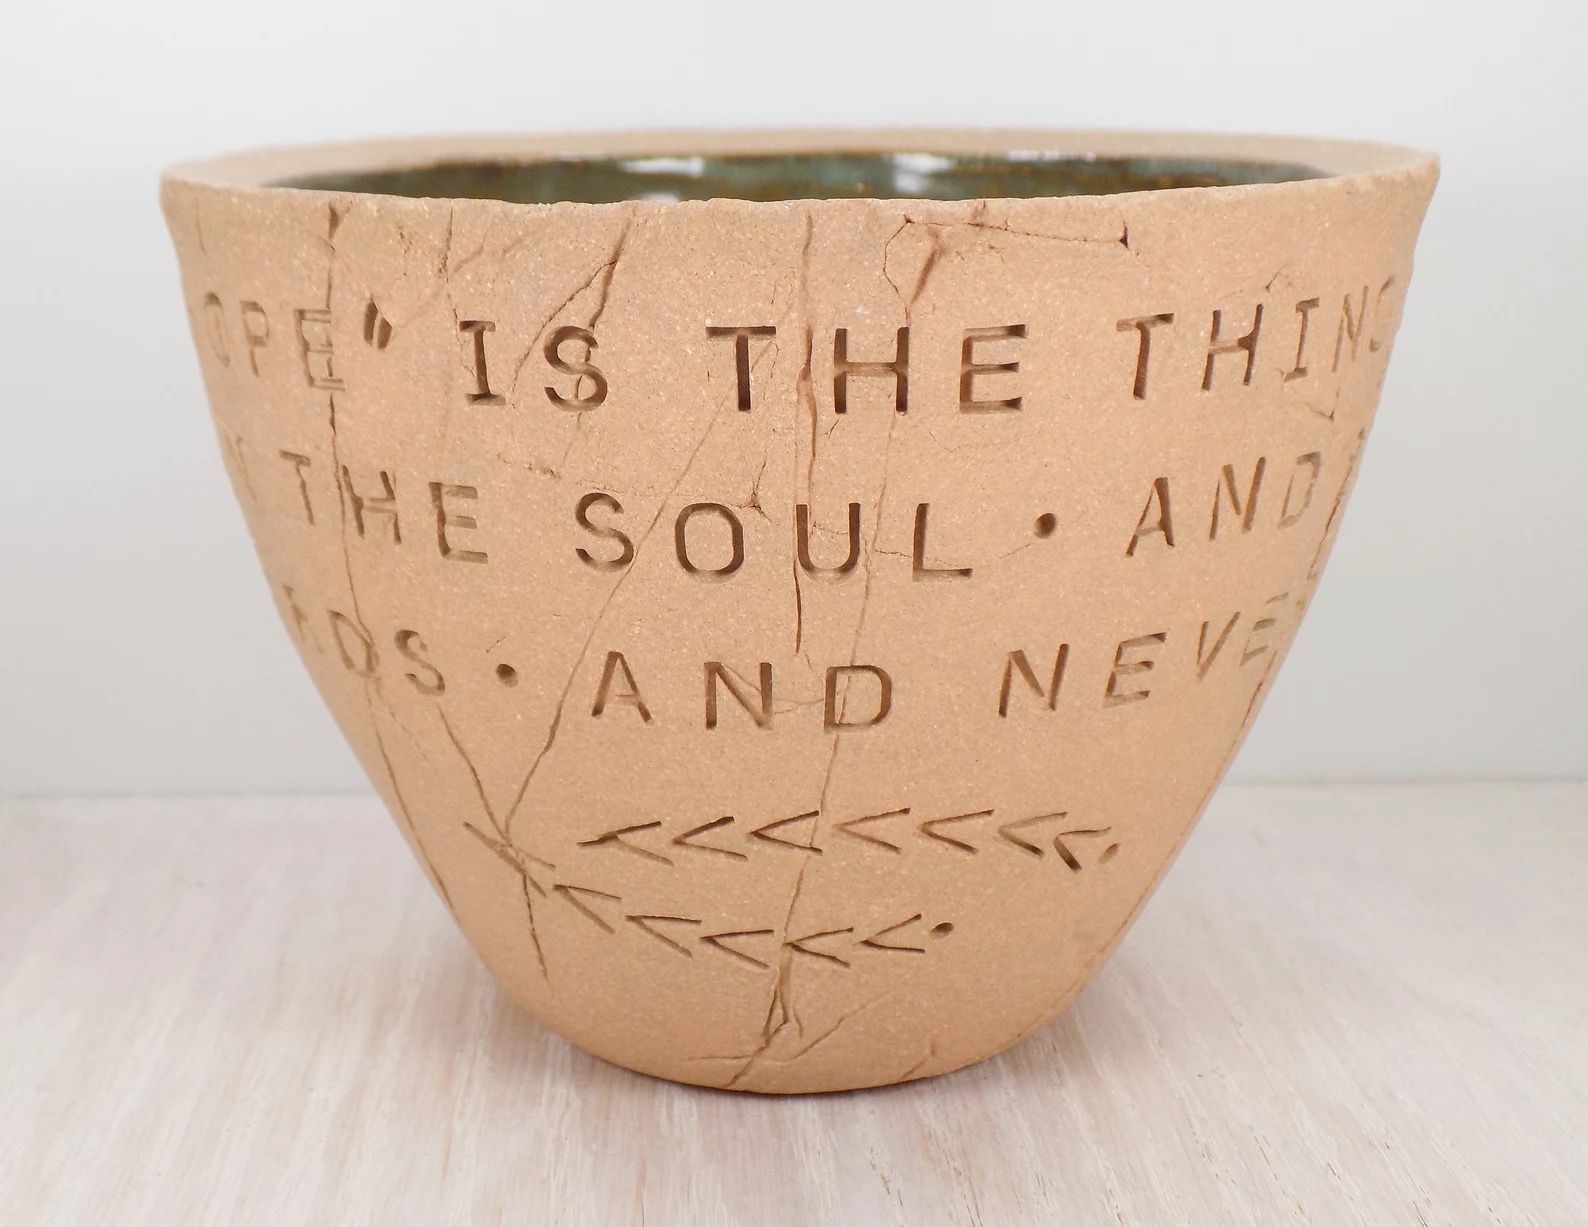 A unglazed ceramic bowl carved with a quote from Emily Dickinson.